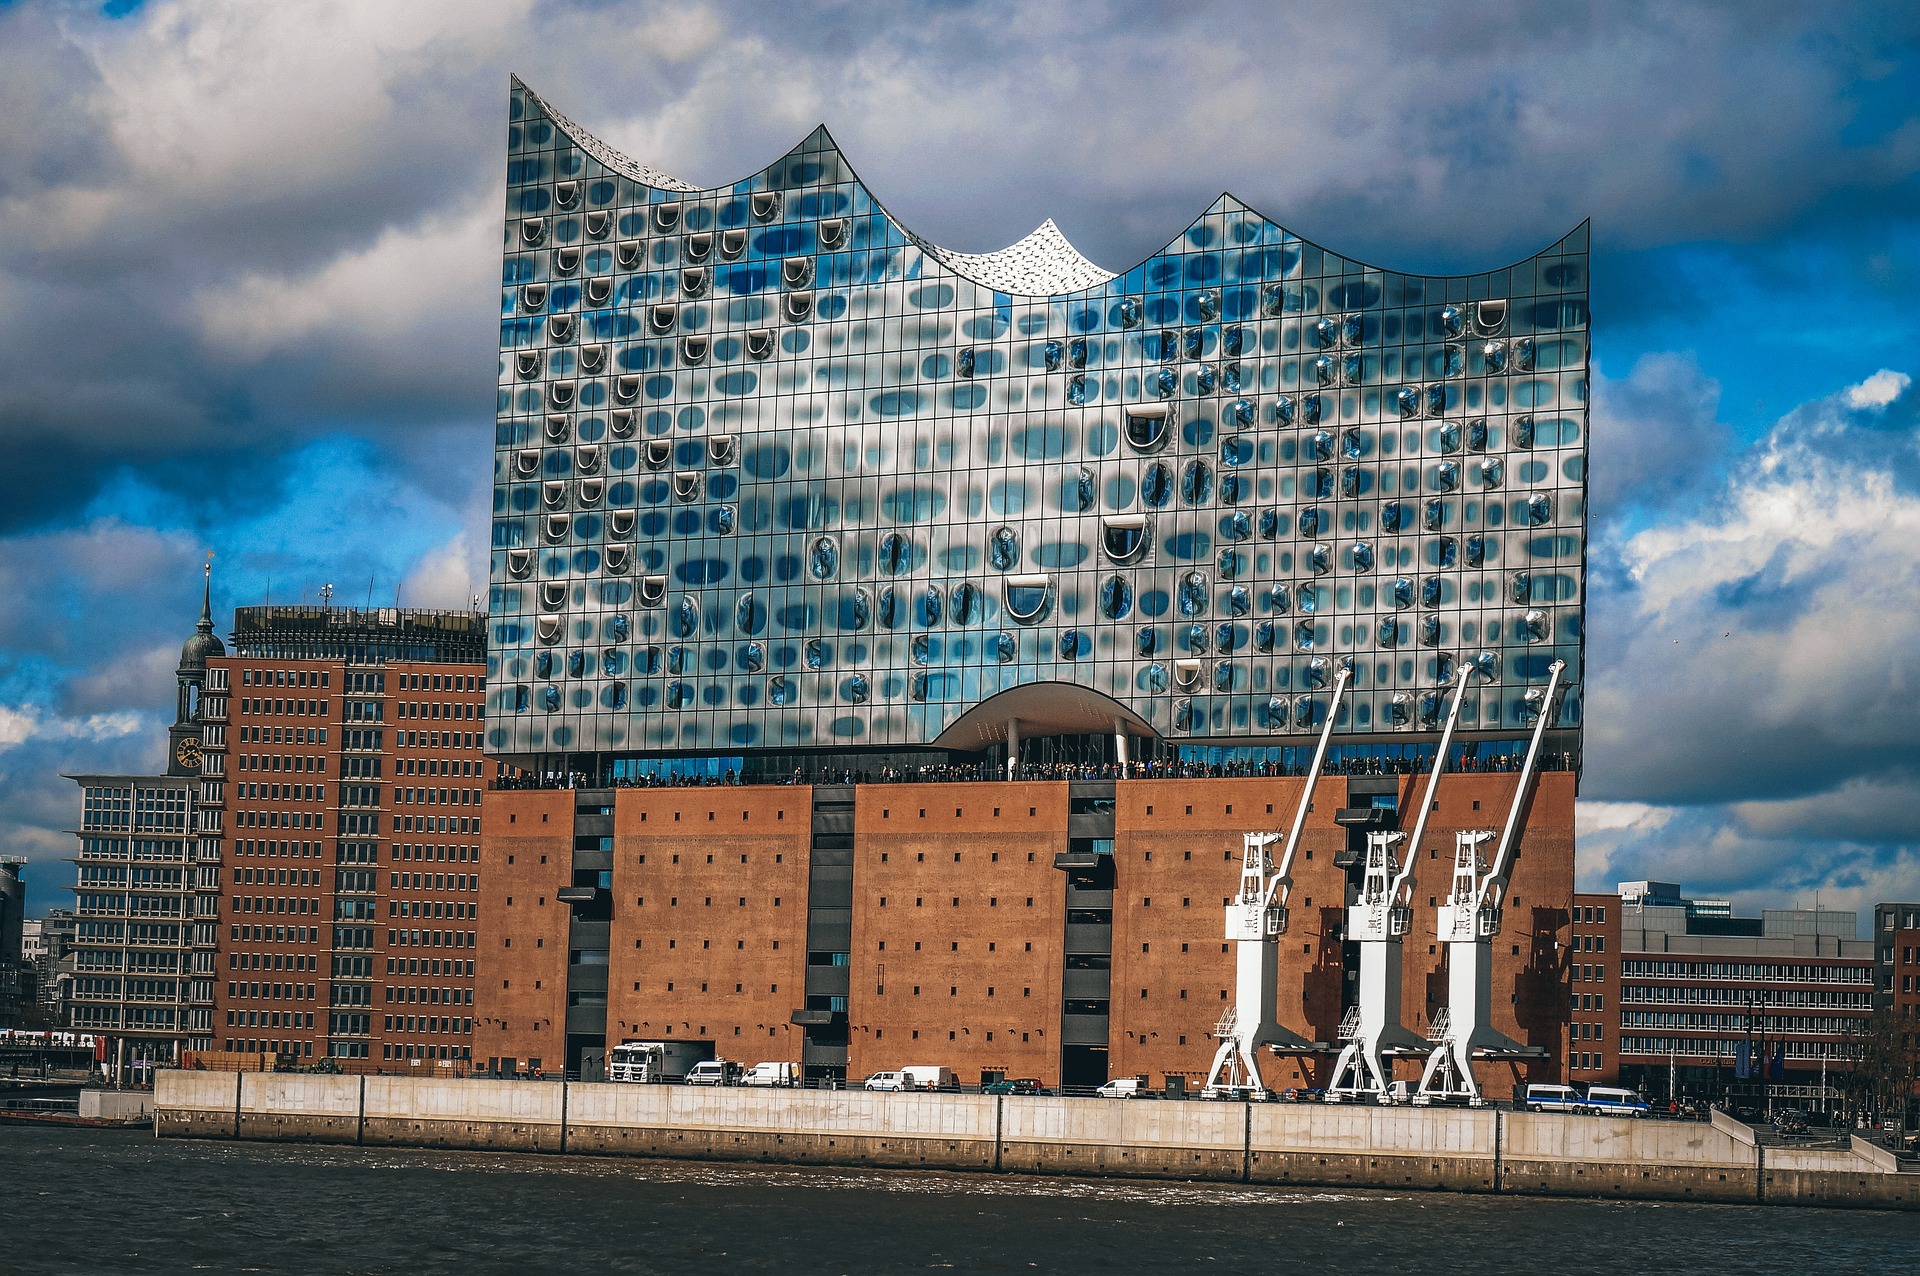 The glass facade of the Elbphilharmonie is unique.